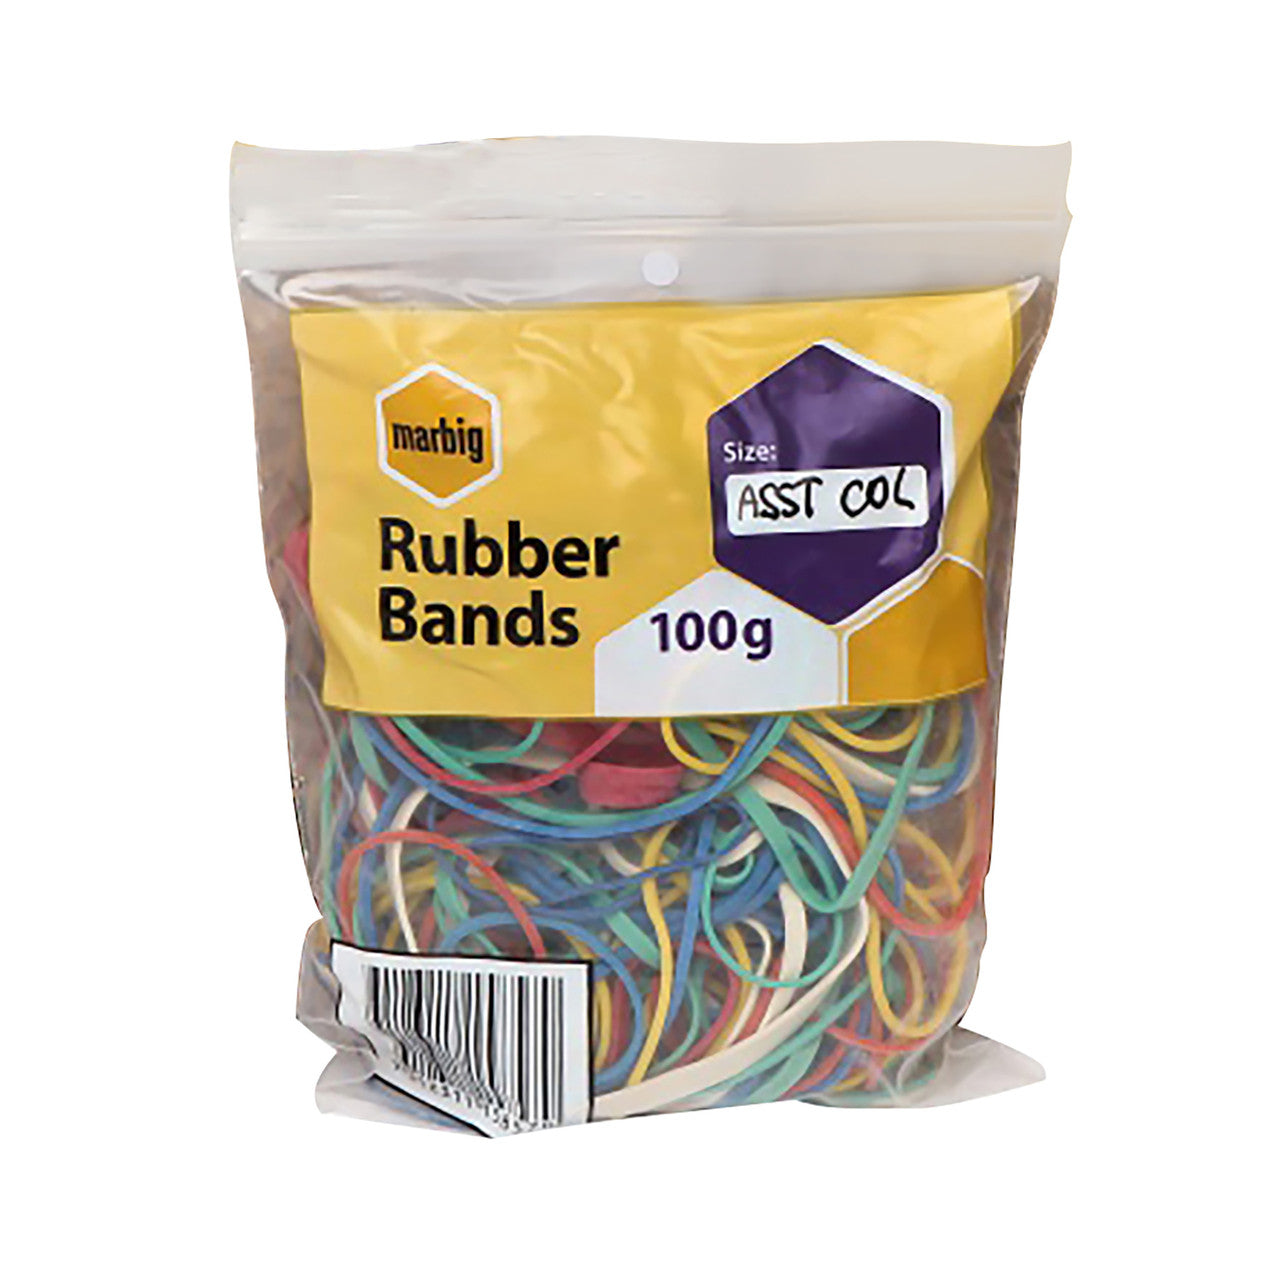 Marbig Rubber Bands Assorted 100g